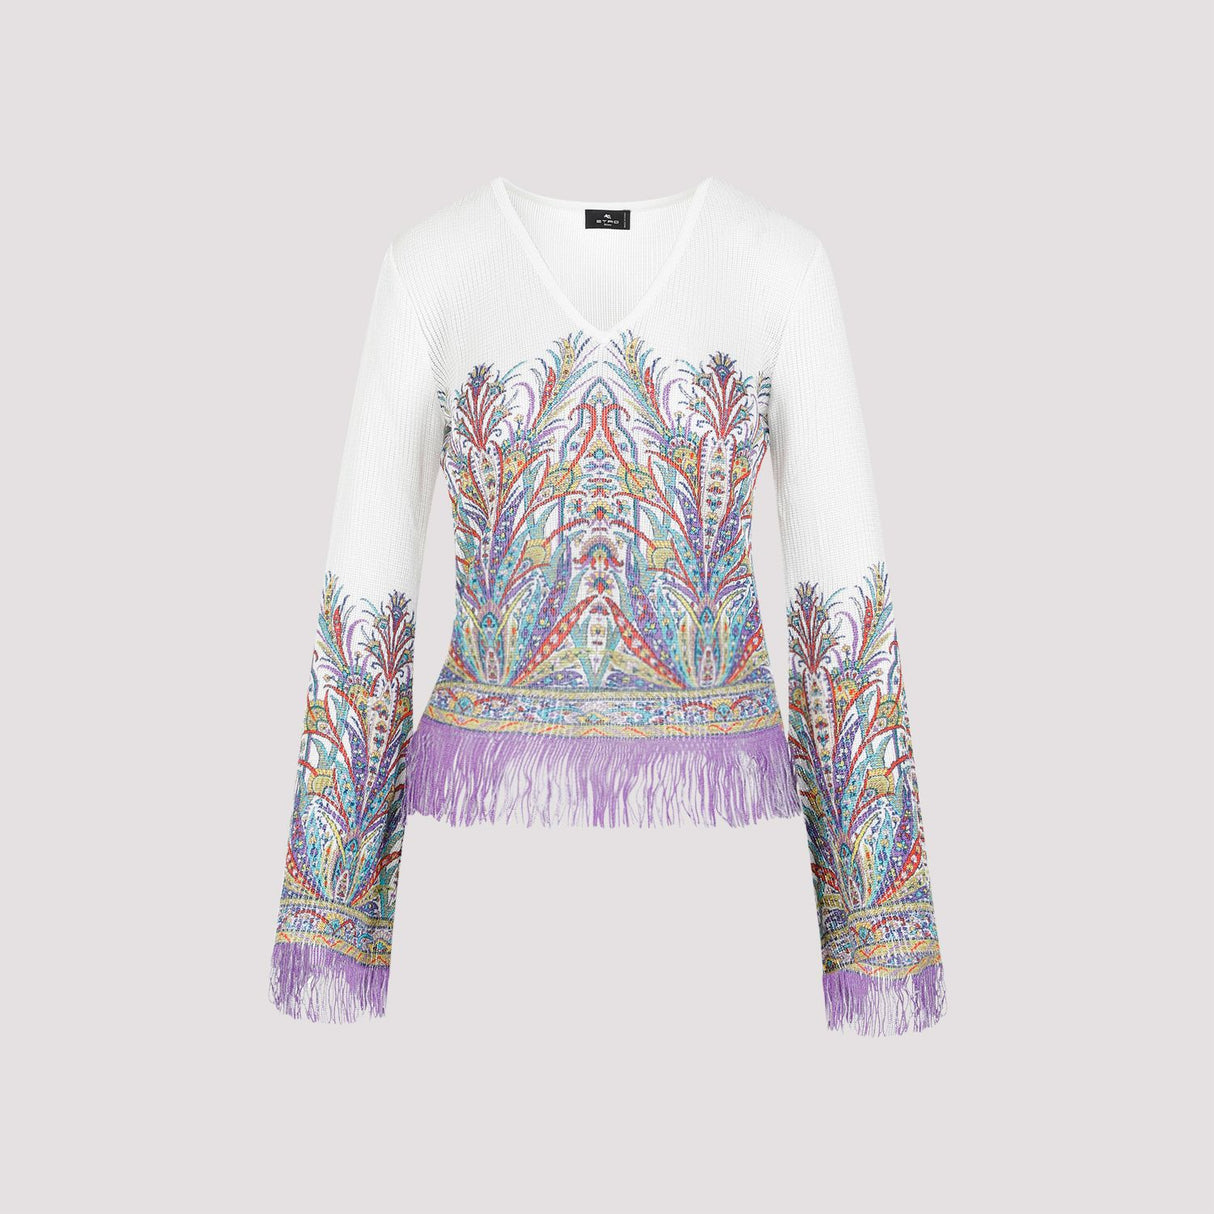 ETRO Simple White Viscose Top - SS24 Collection for Women